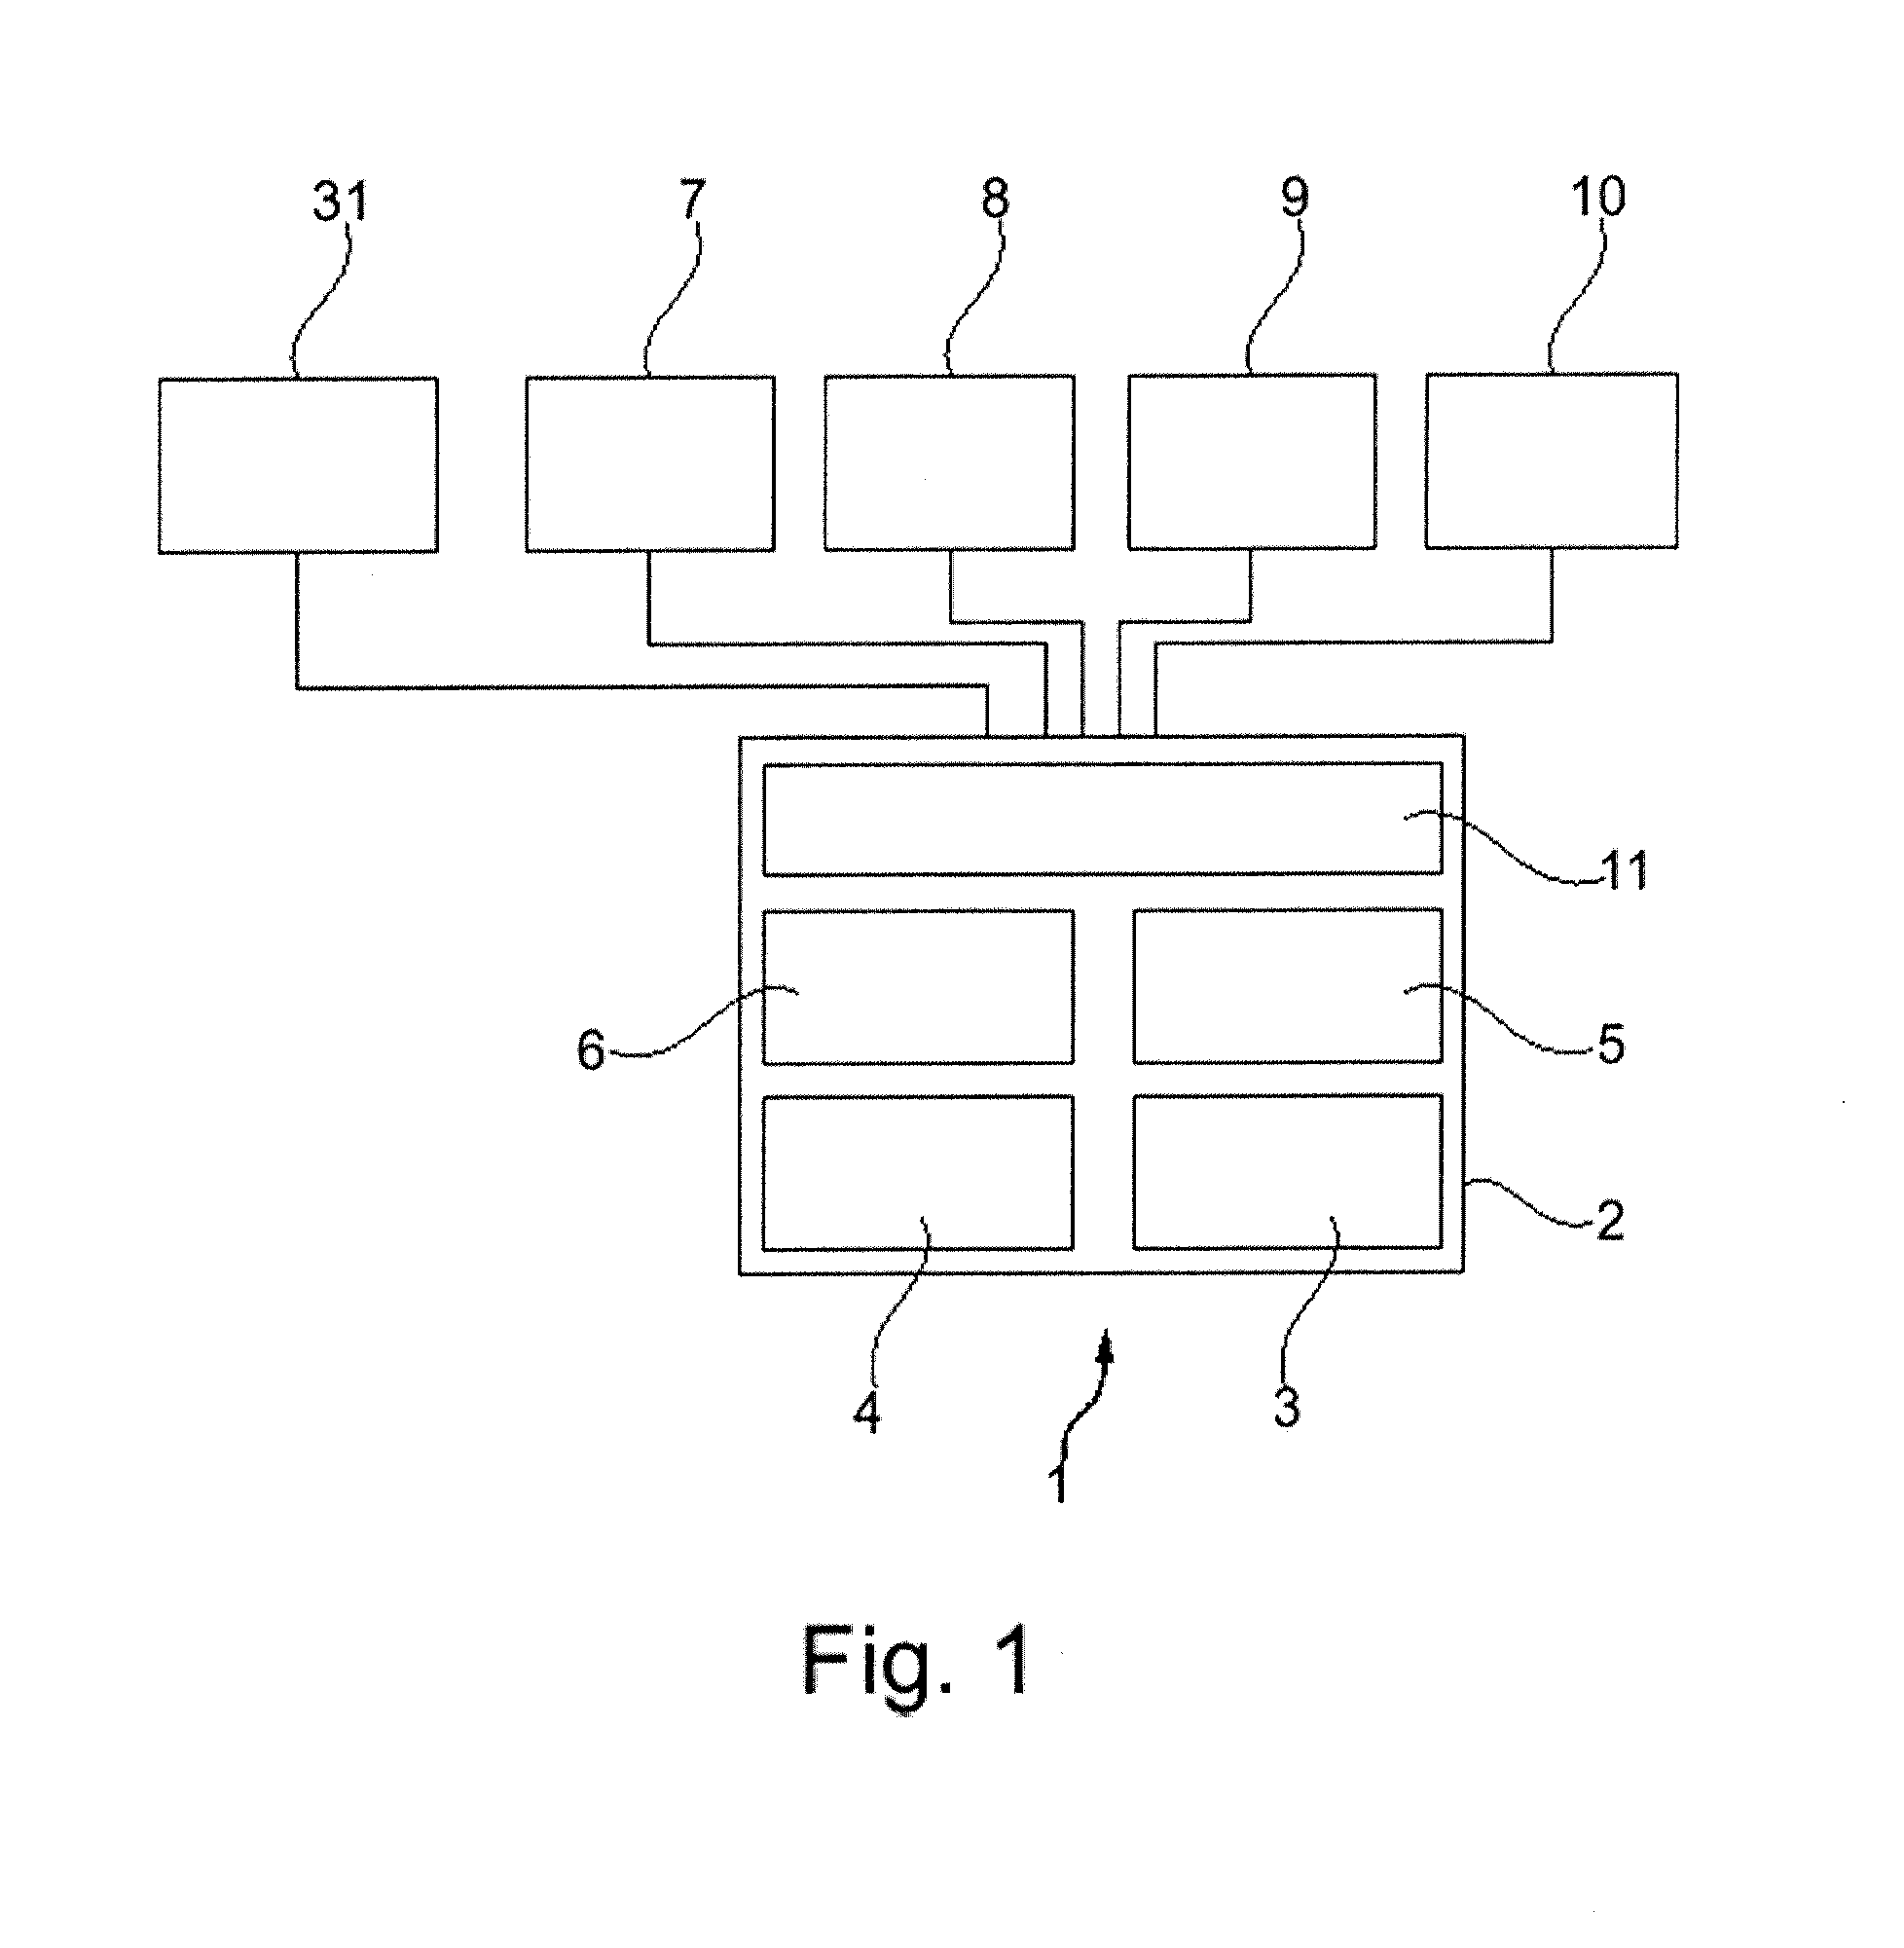 Apparatus for ascertaining a personal tinnitus frequency